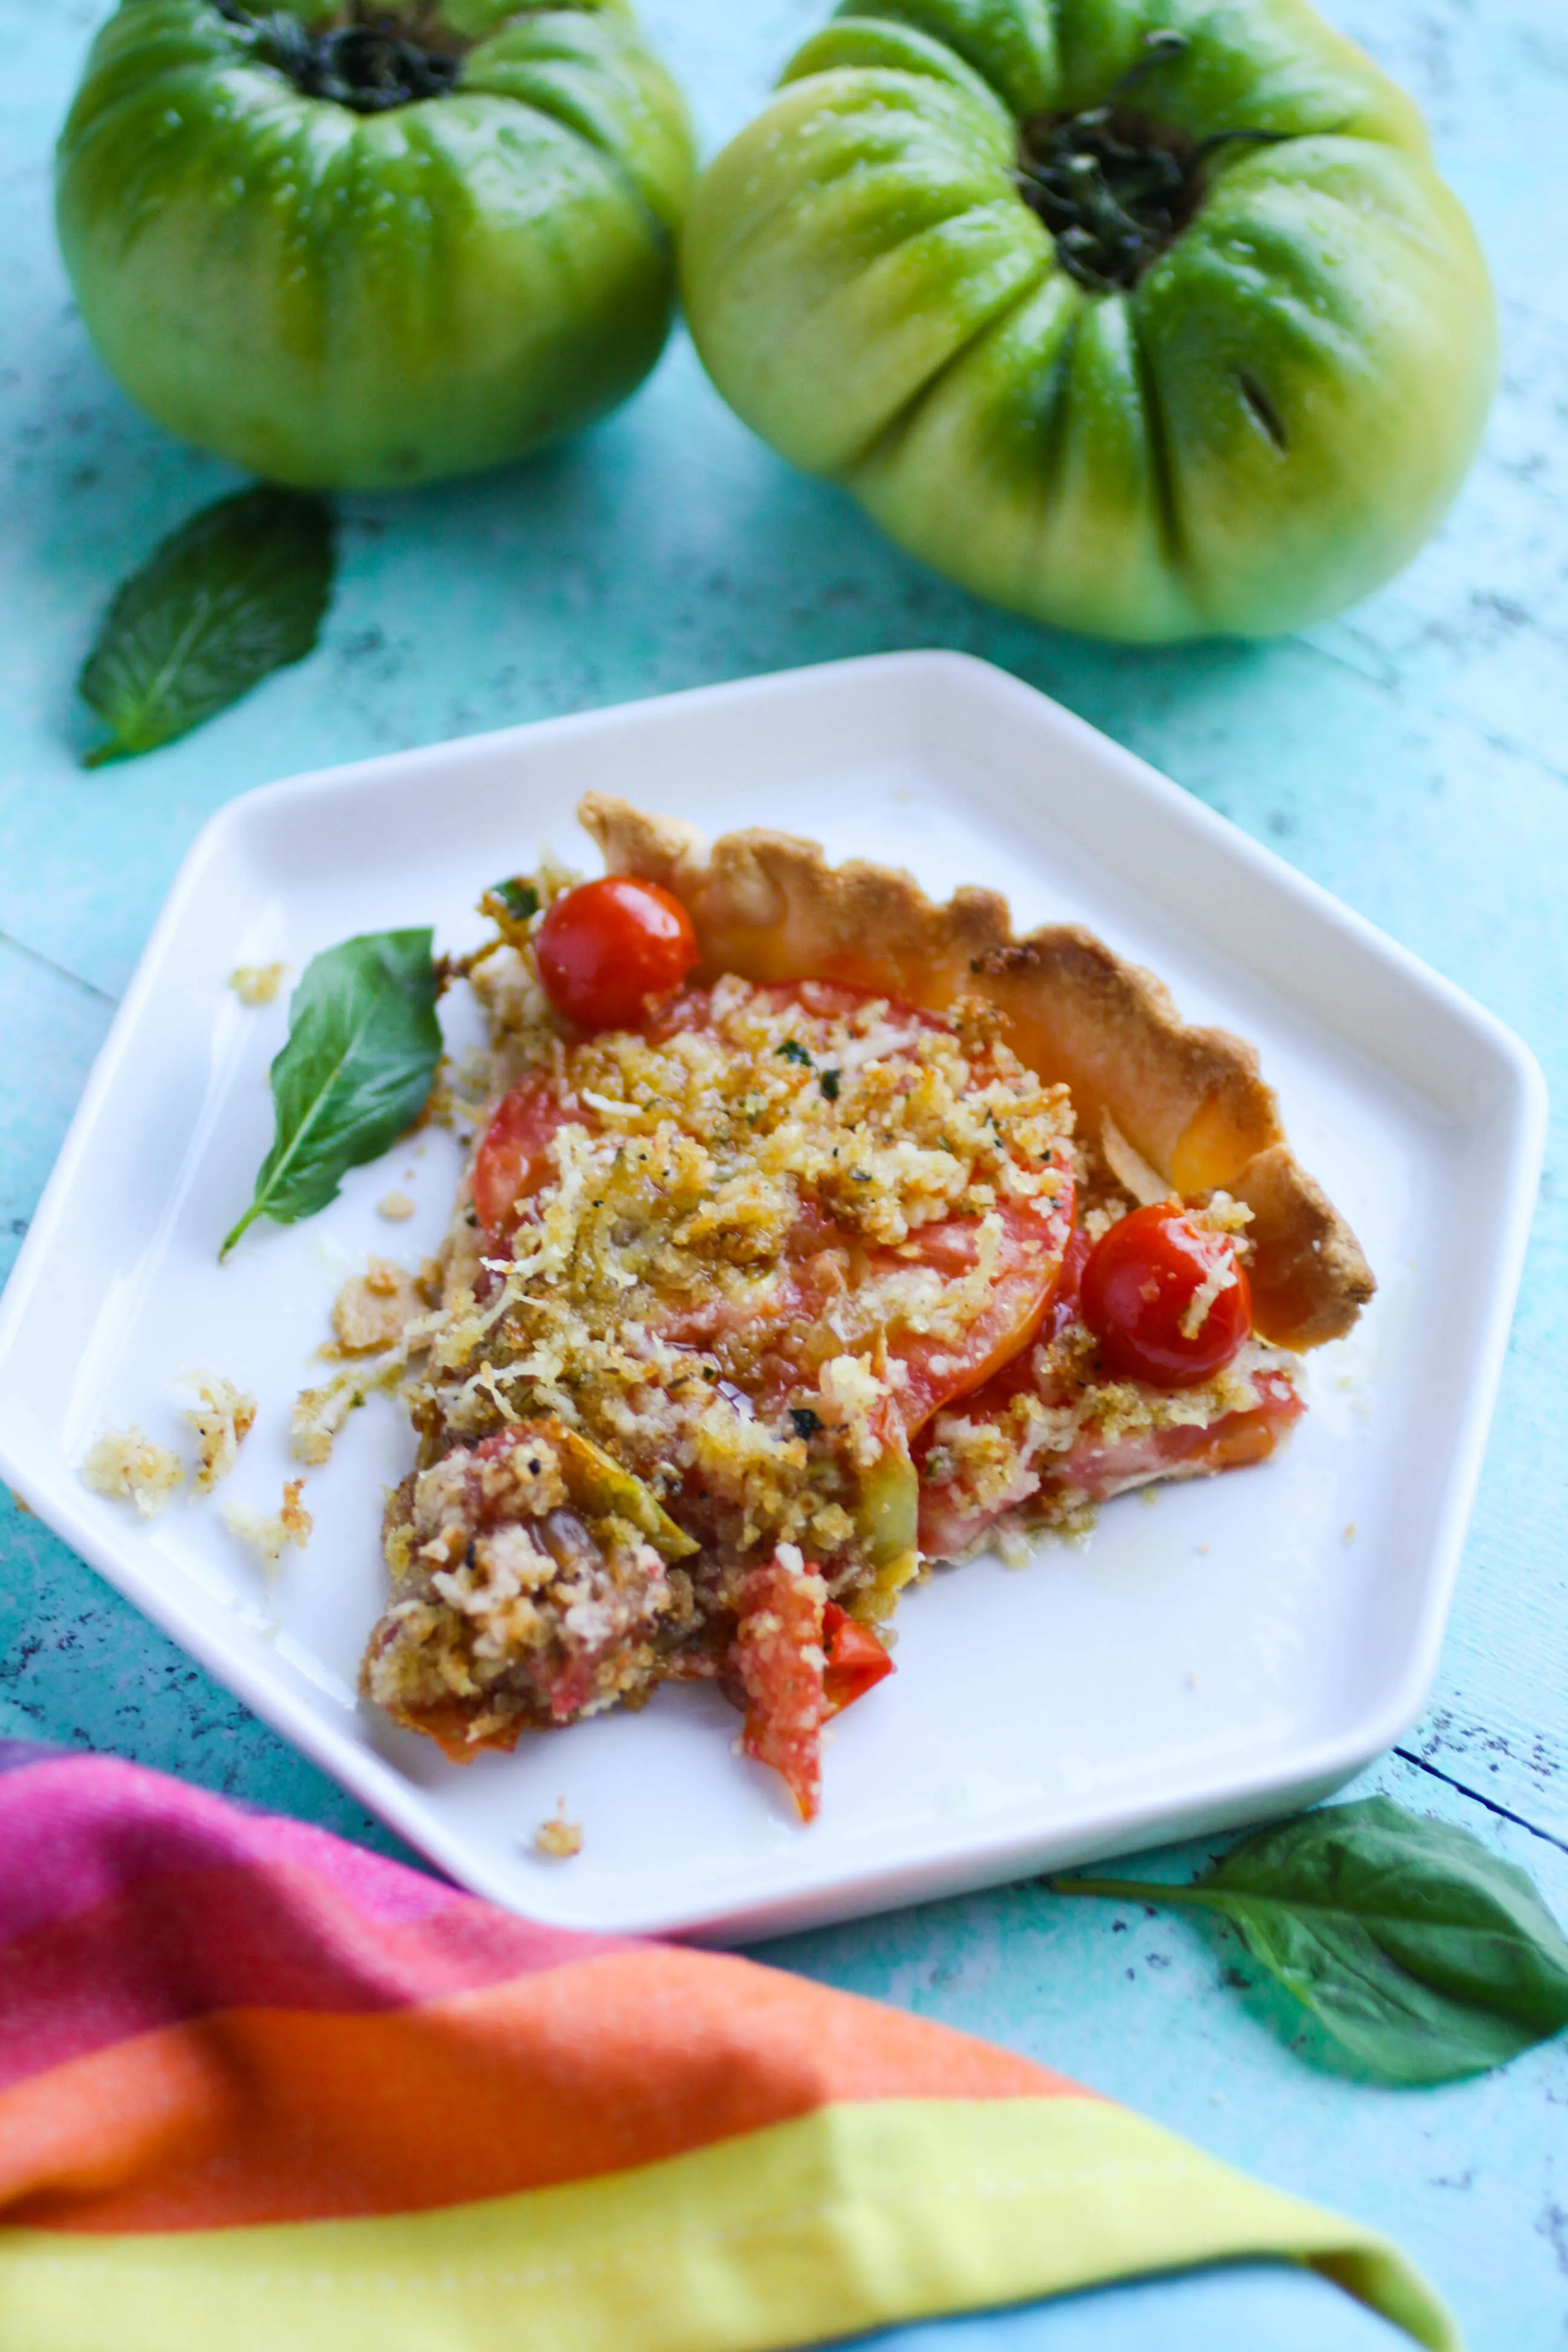 Tomato Tart with Cheesy Breadcrumbs is a bit of summer in a pan. Fresh tomatoes make this simple dish everything! You'll love this as an appetizer, or as part of a light meal.